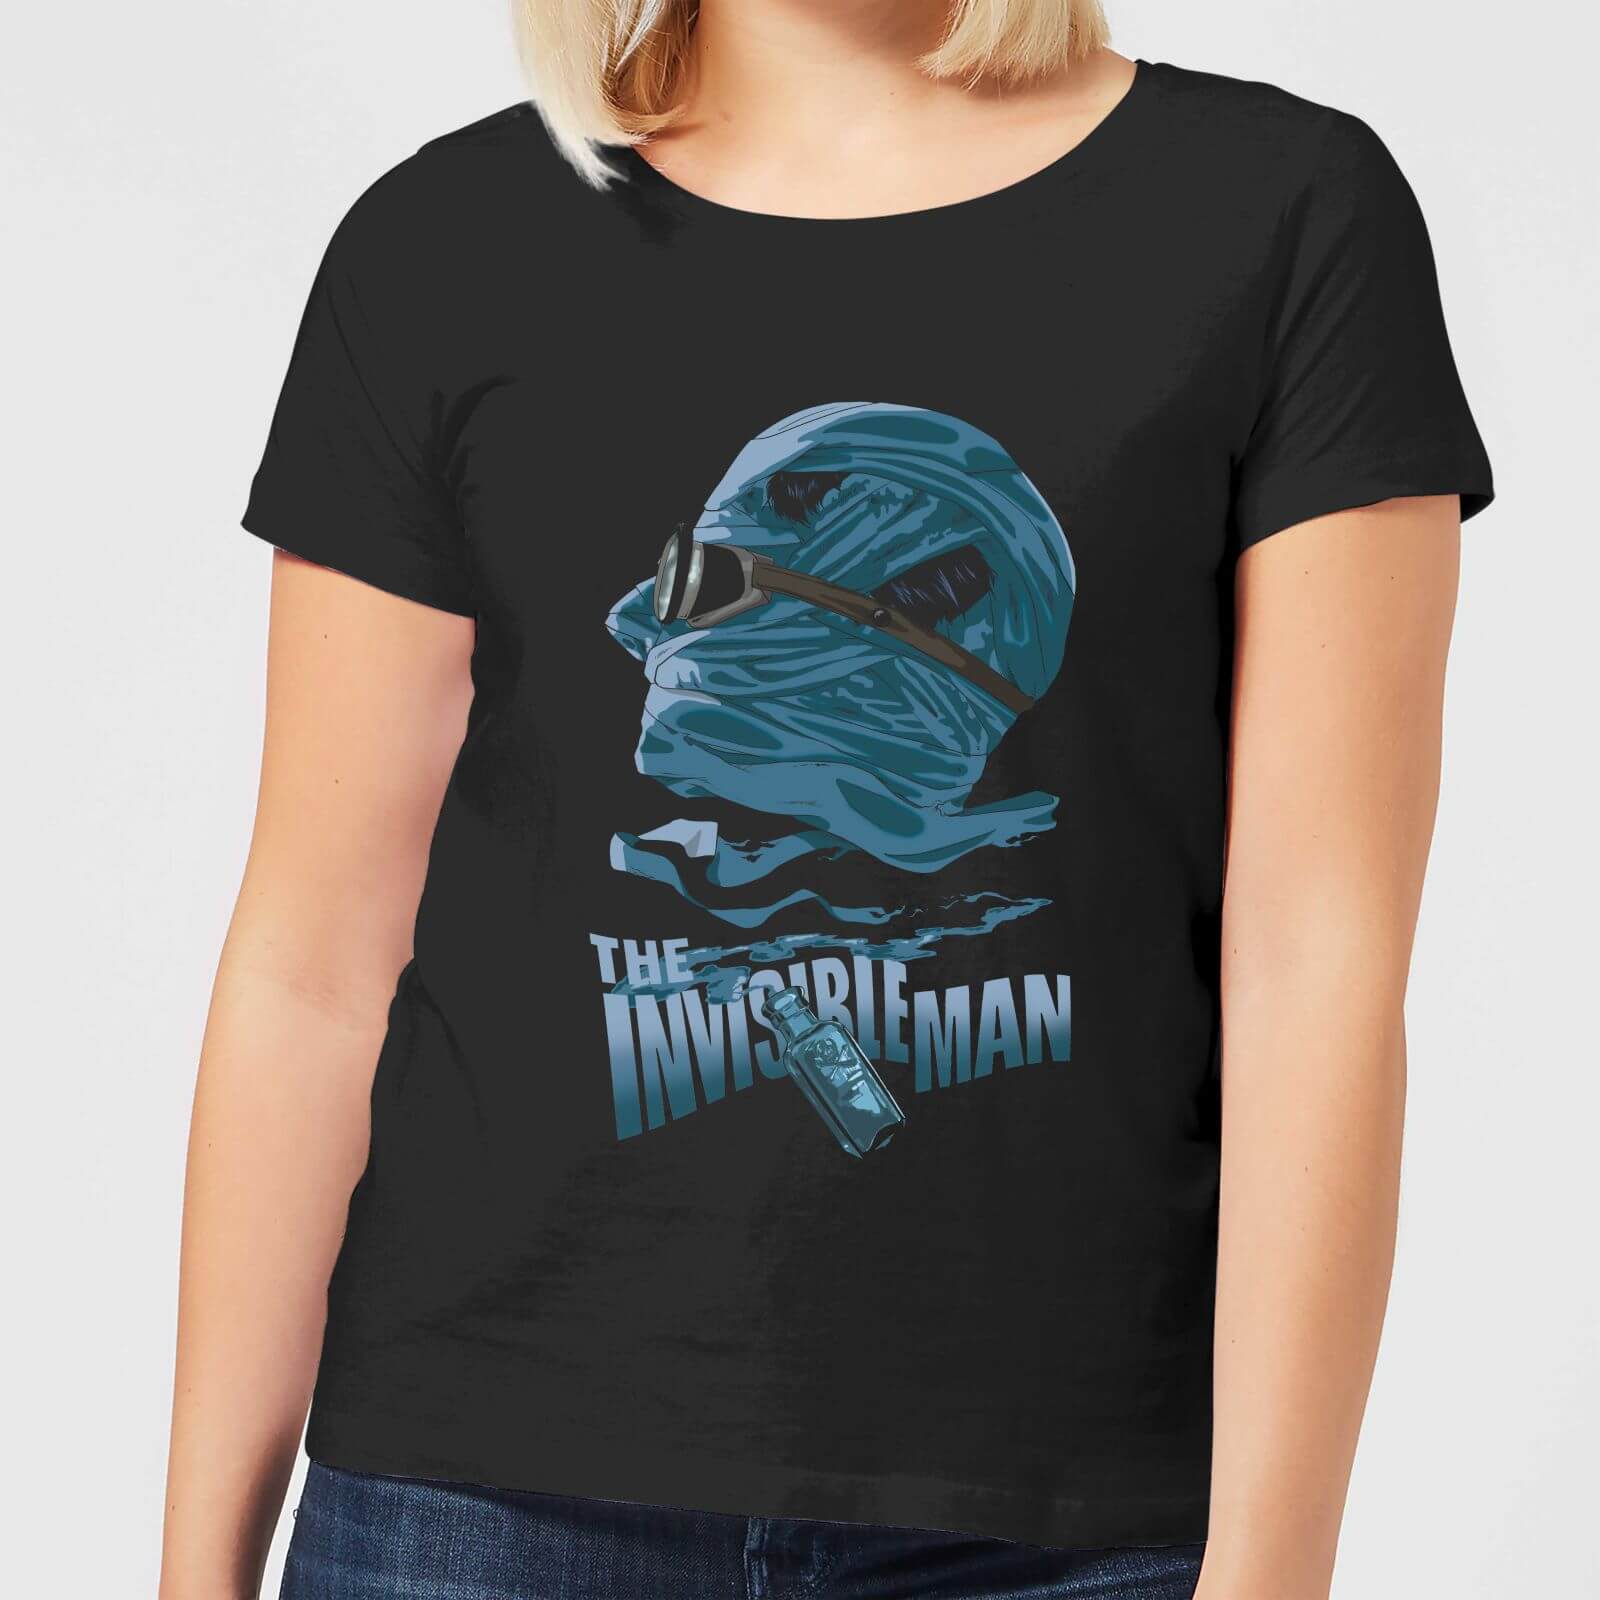 Universal Monsters The Invisible Man Illustrated Women's T-Shirt - Black - S - Black